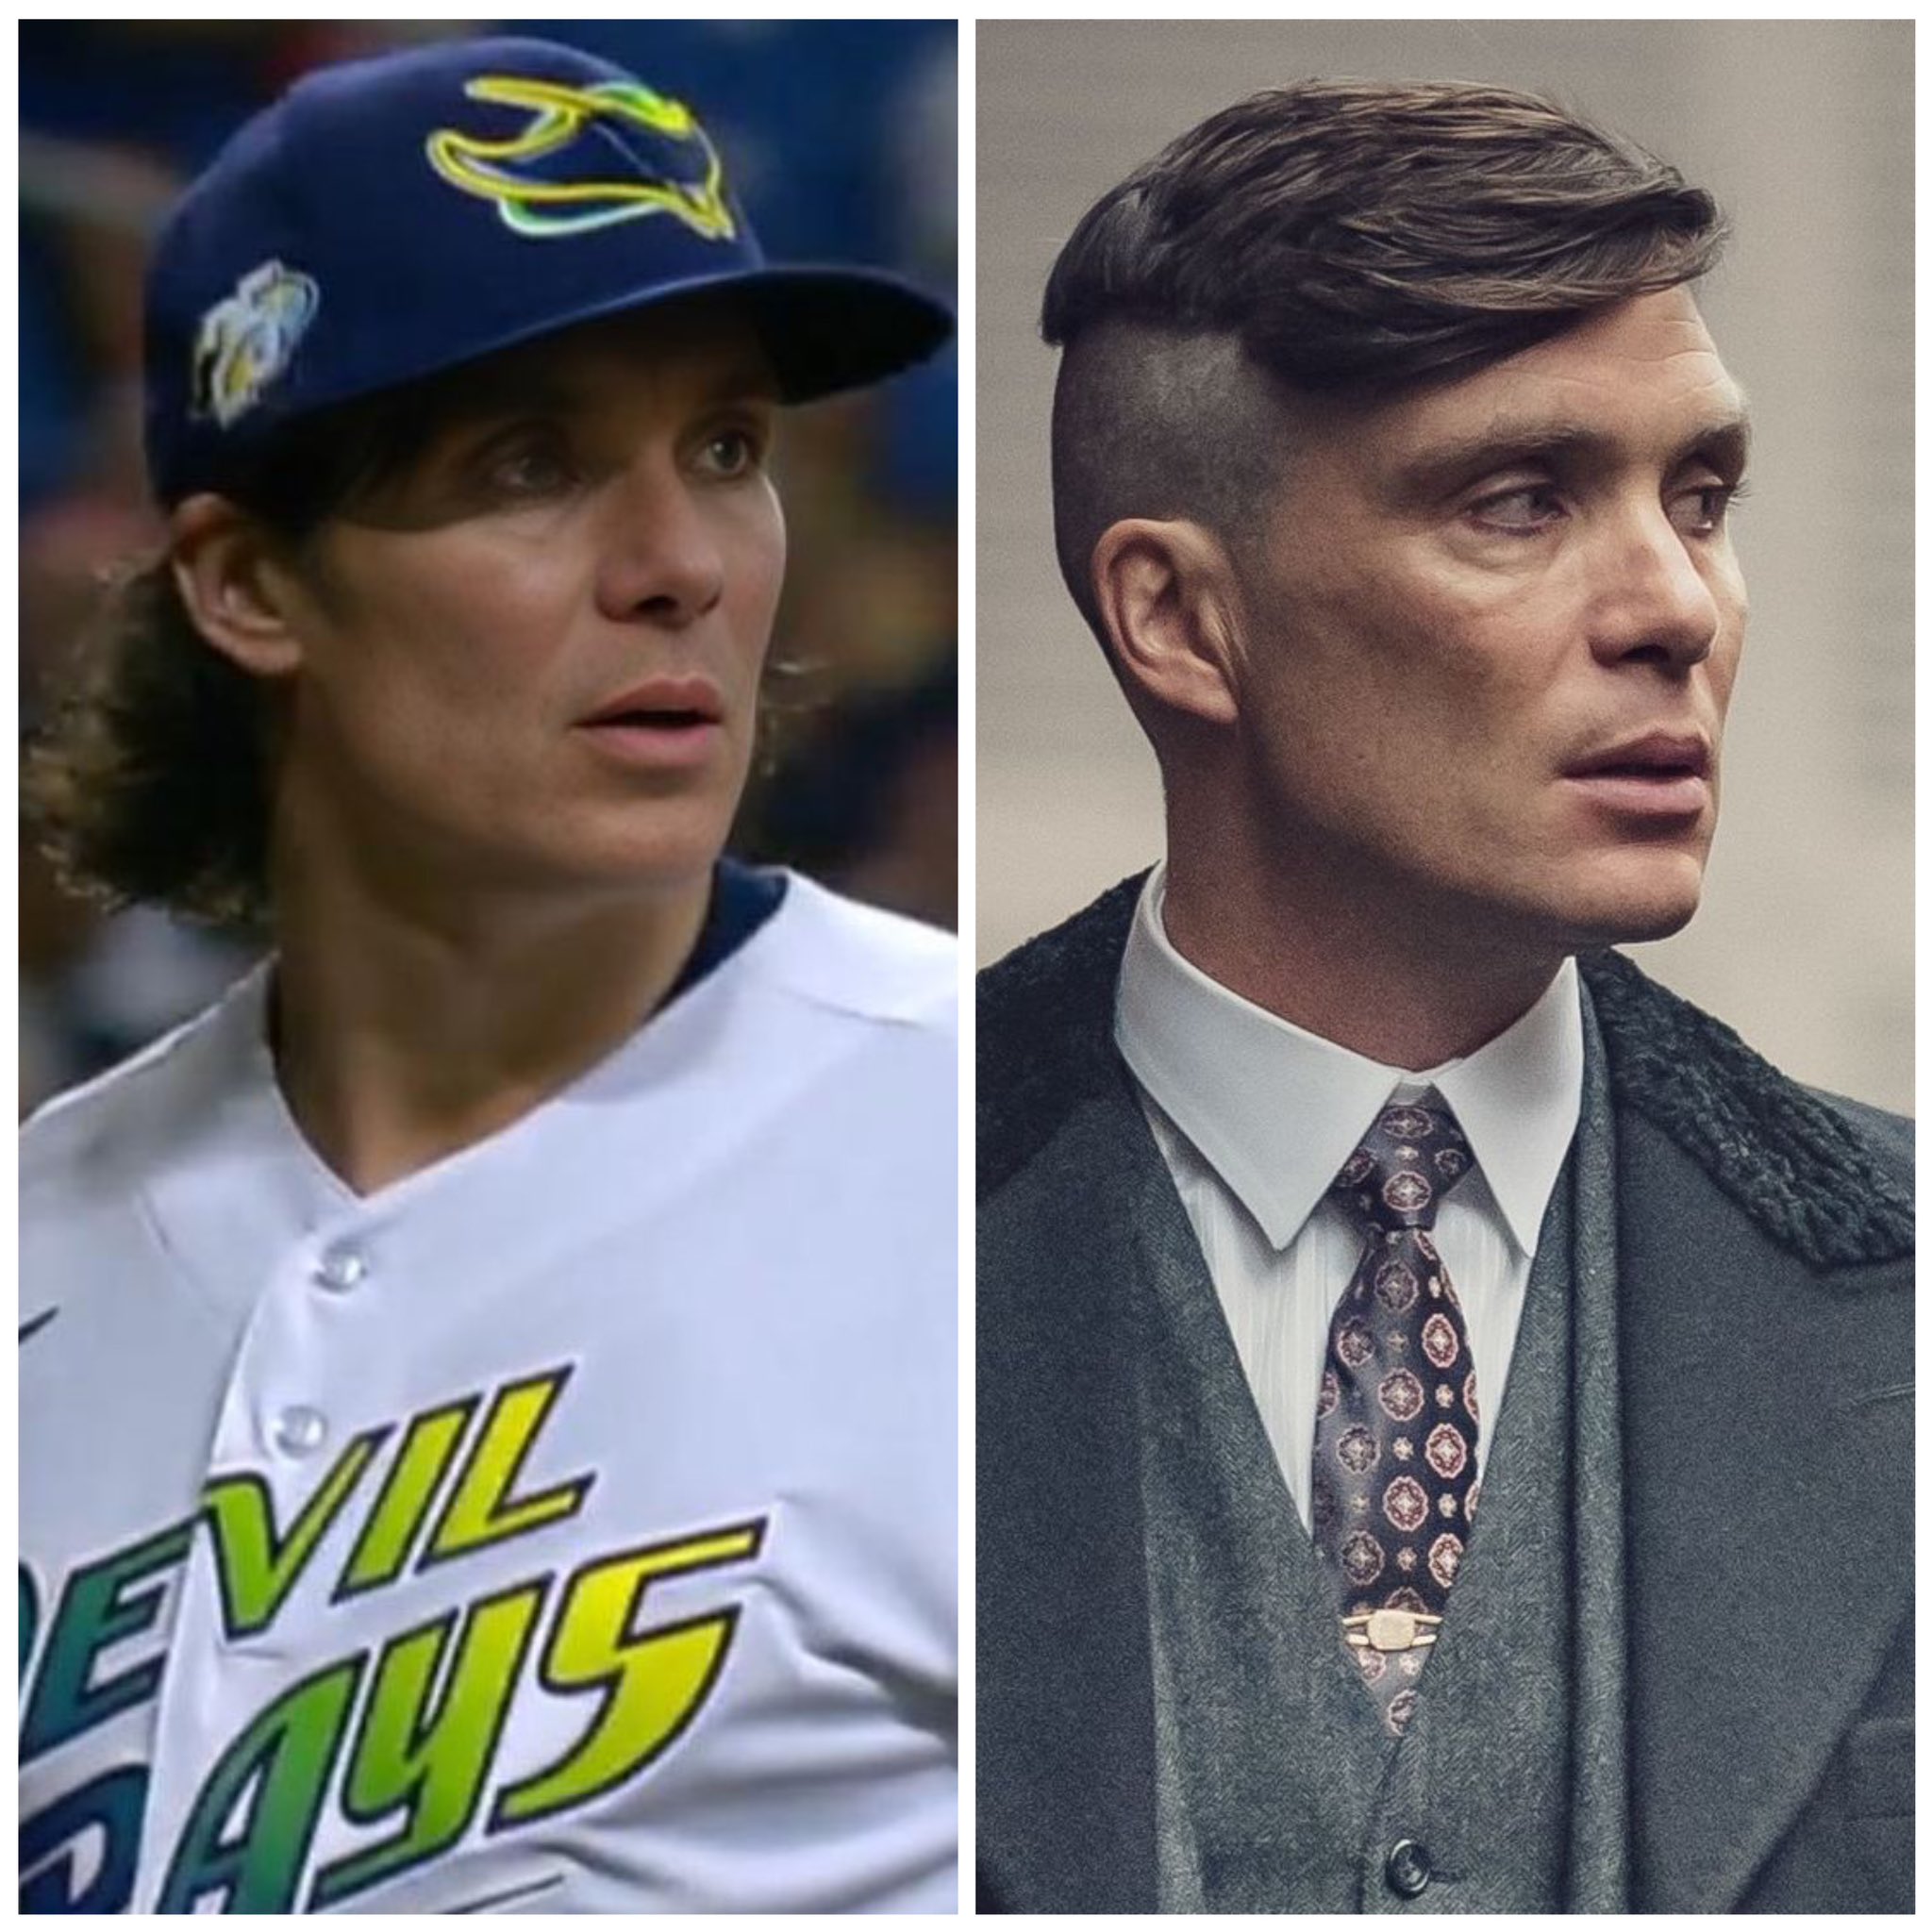 mik on X: probably because the left photo has cillian murphy's